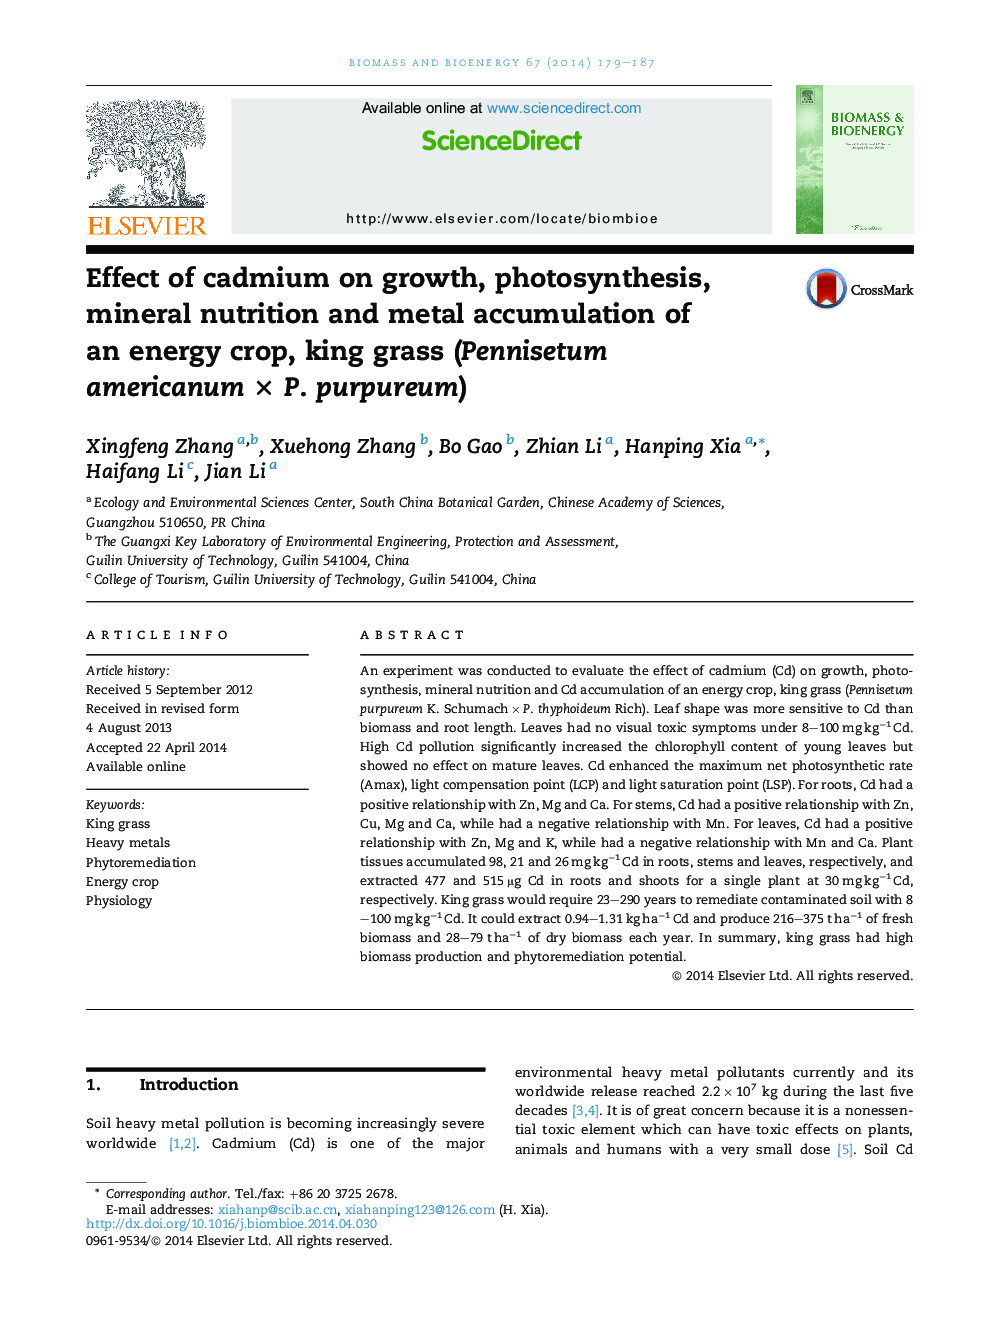 Effect of cadmium on growth, photosynthesis, mineral nutrition and metal accumulation of anÂ energy crop, king grass (Pennisetum americanumÂ ÃÂ P. purpureum)